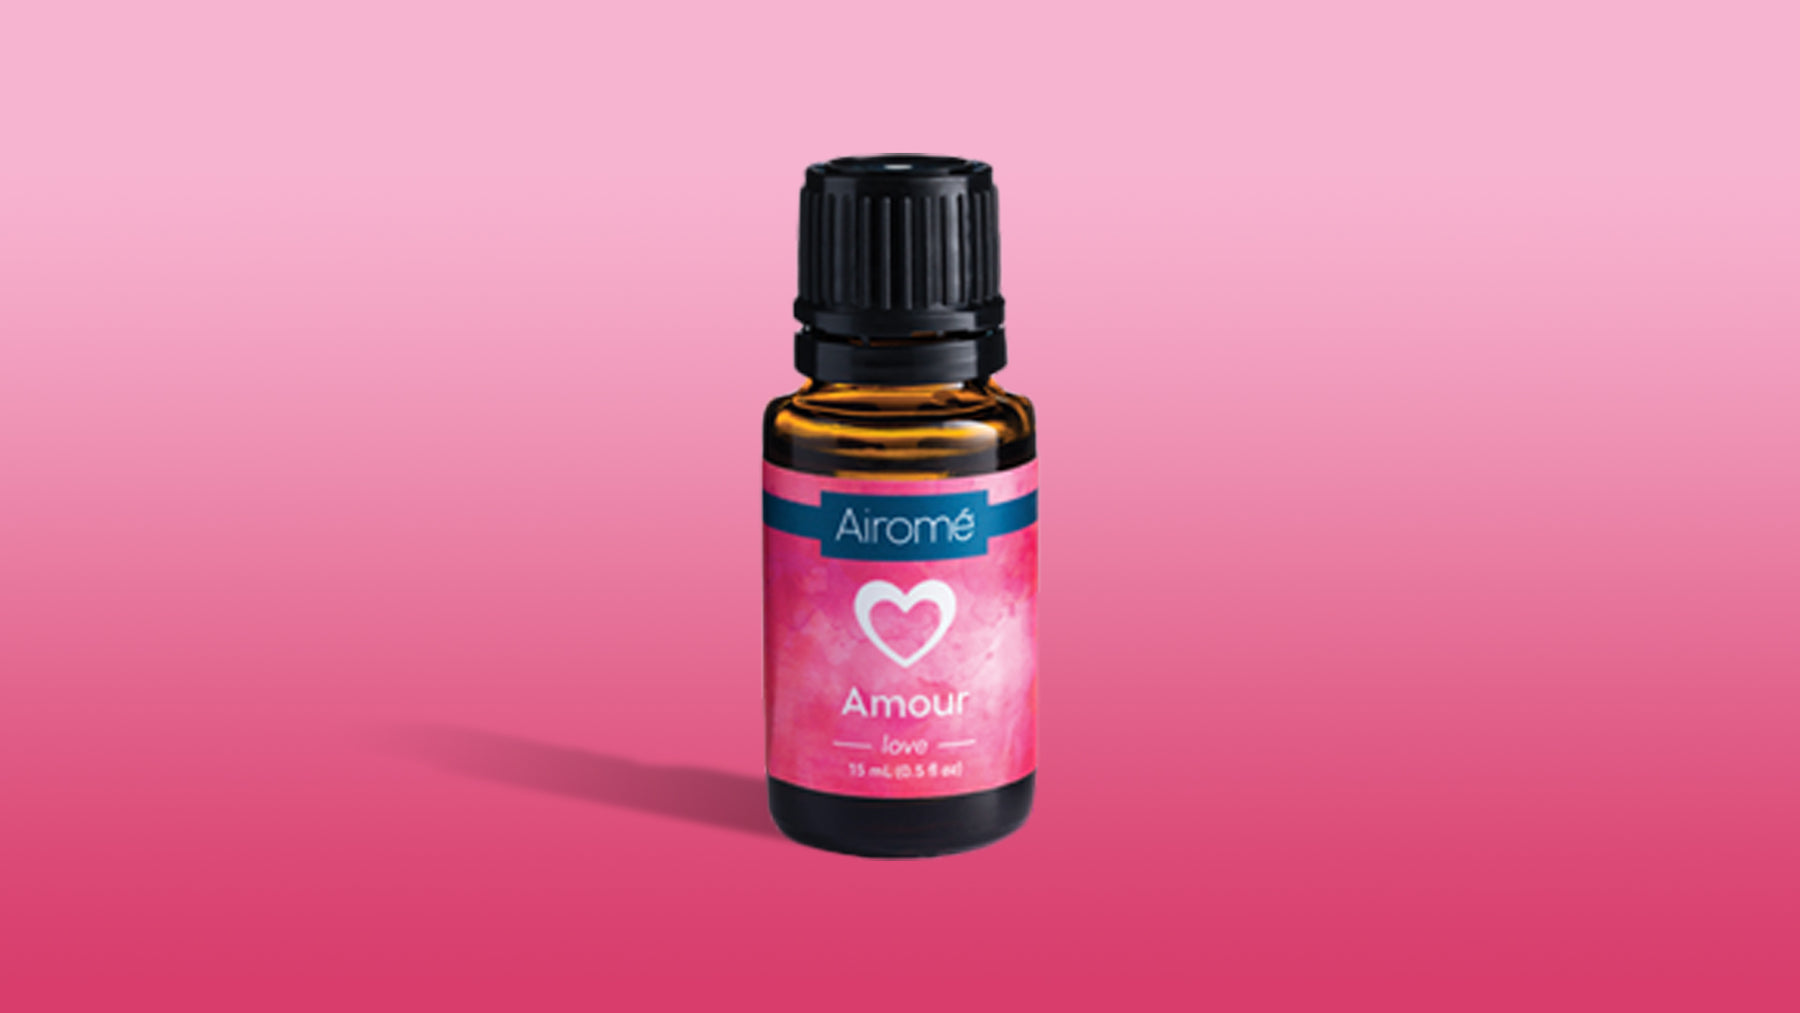 Amour Essential Oil Blend